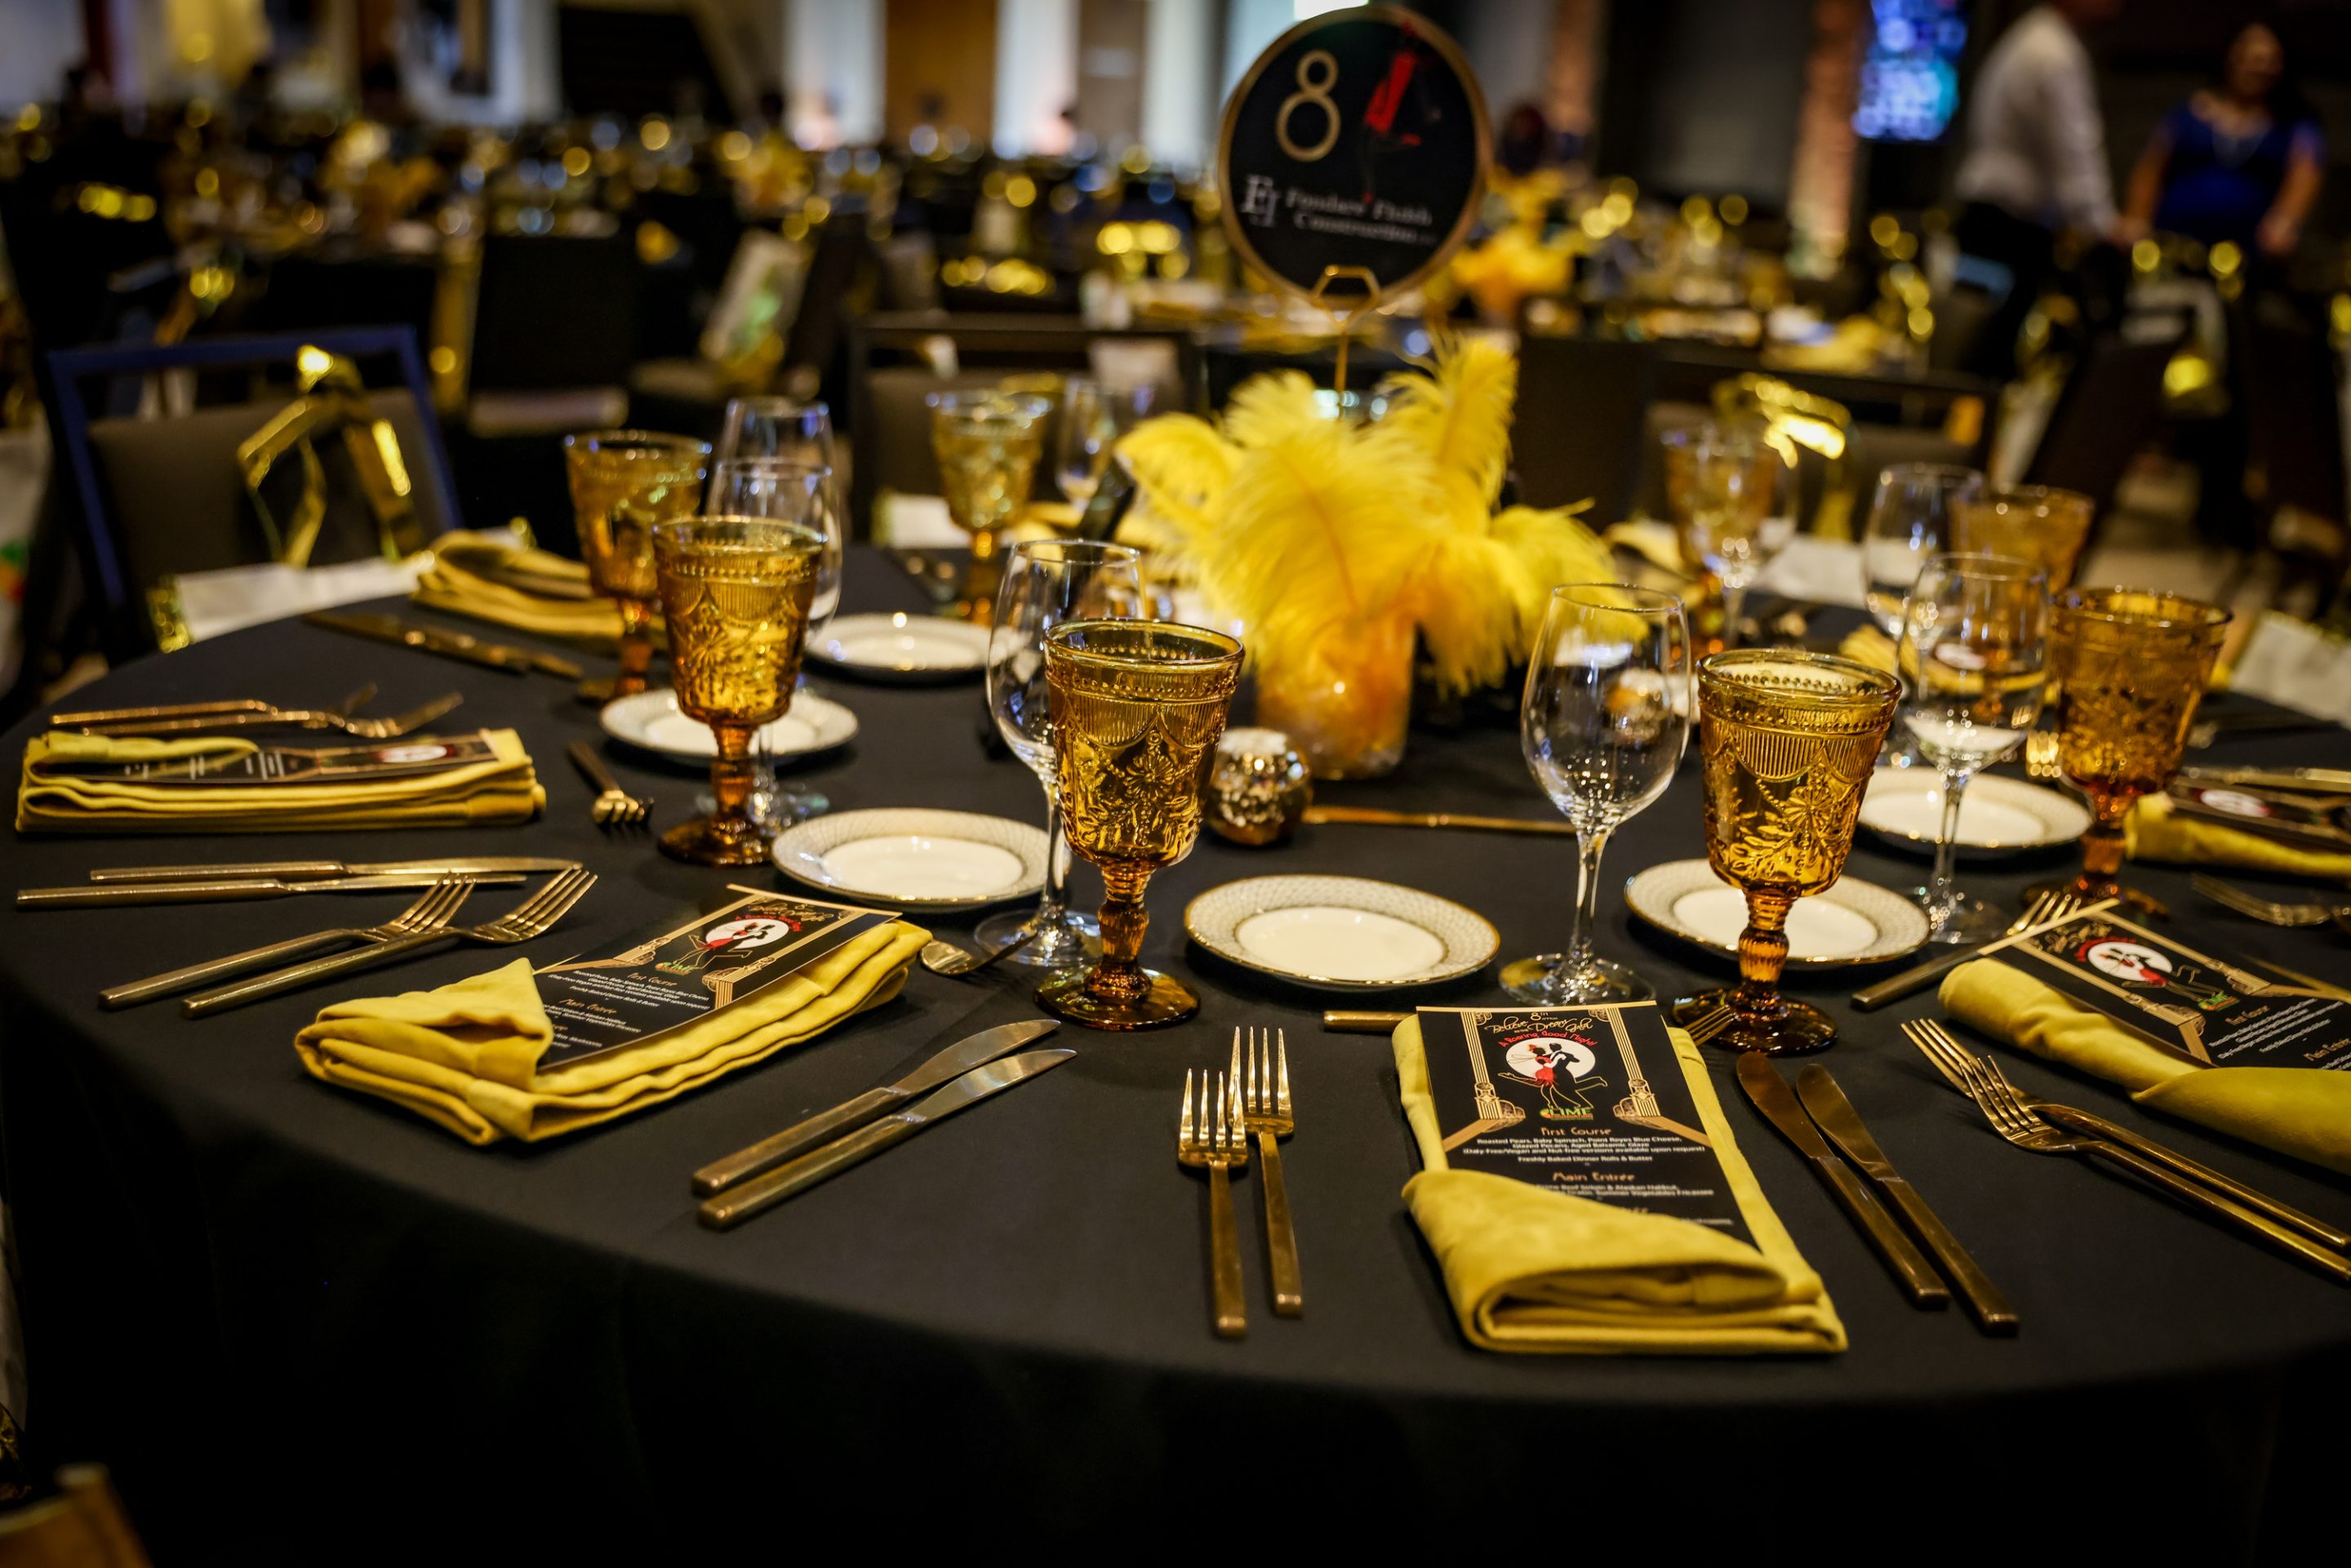 A black table setting with gold plates and silverware.